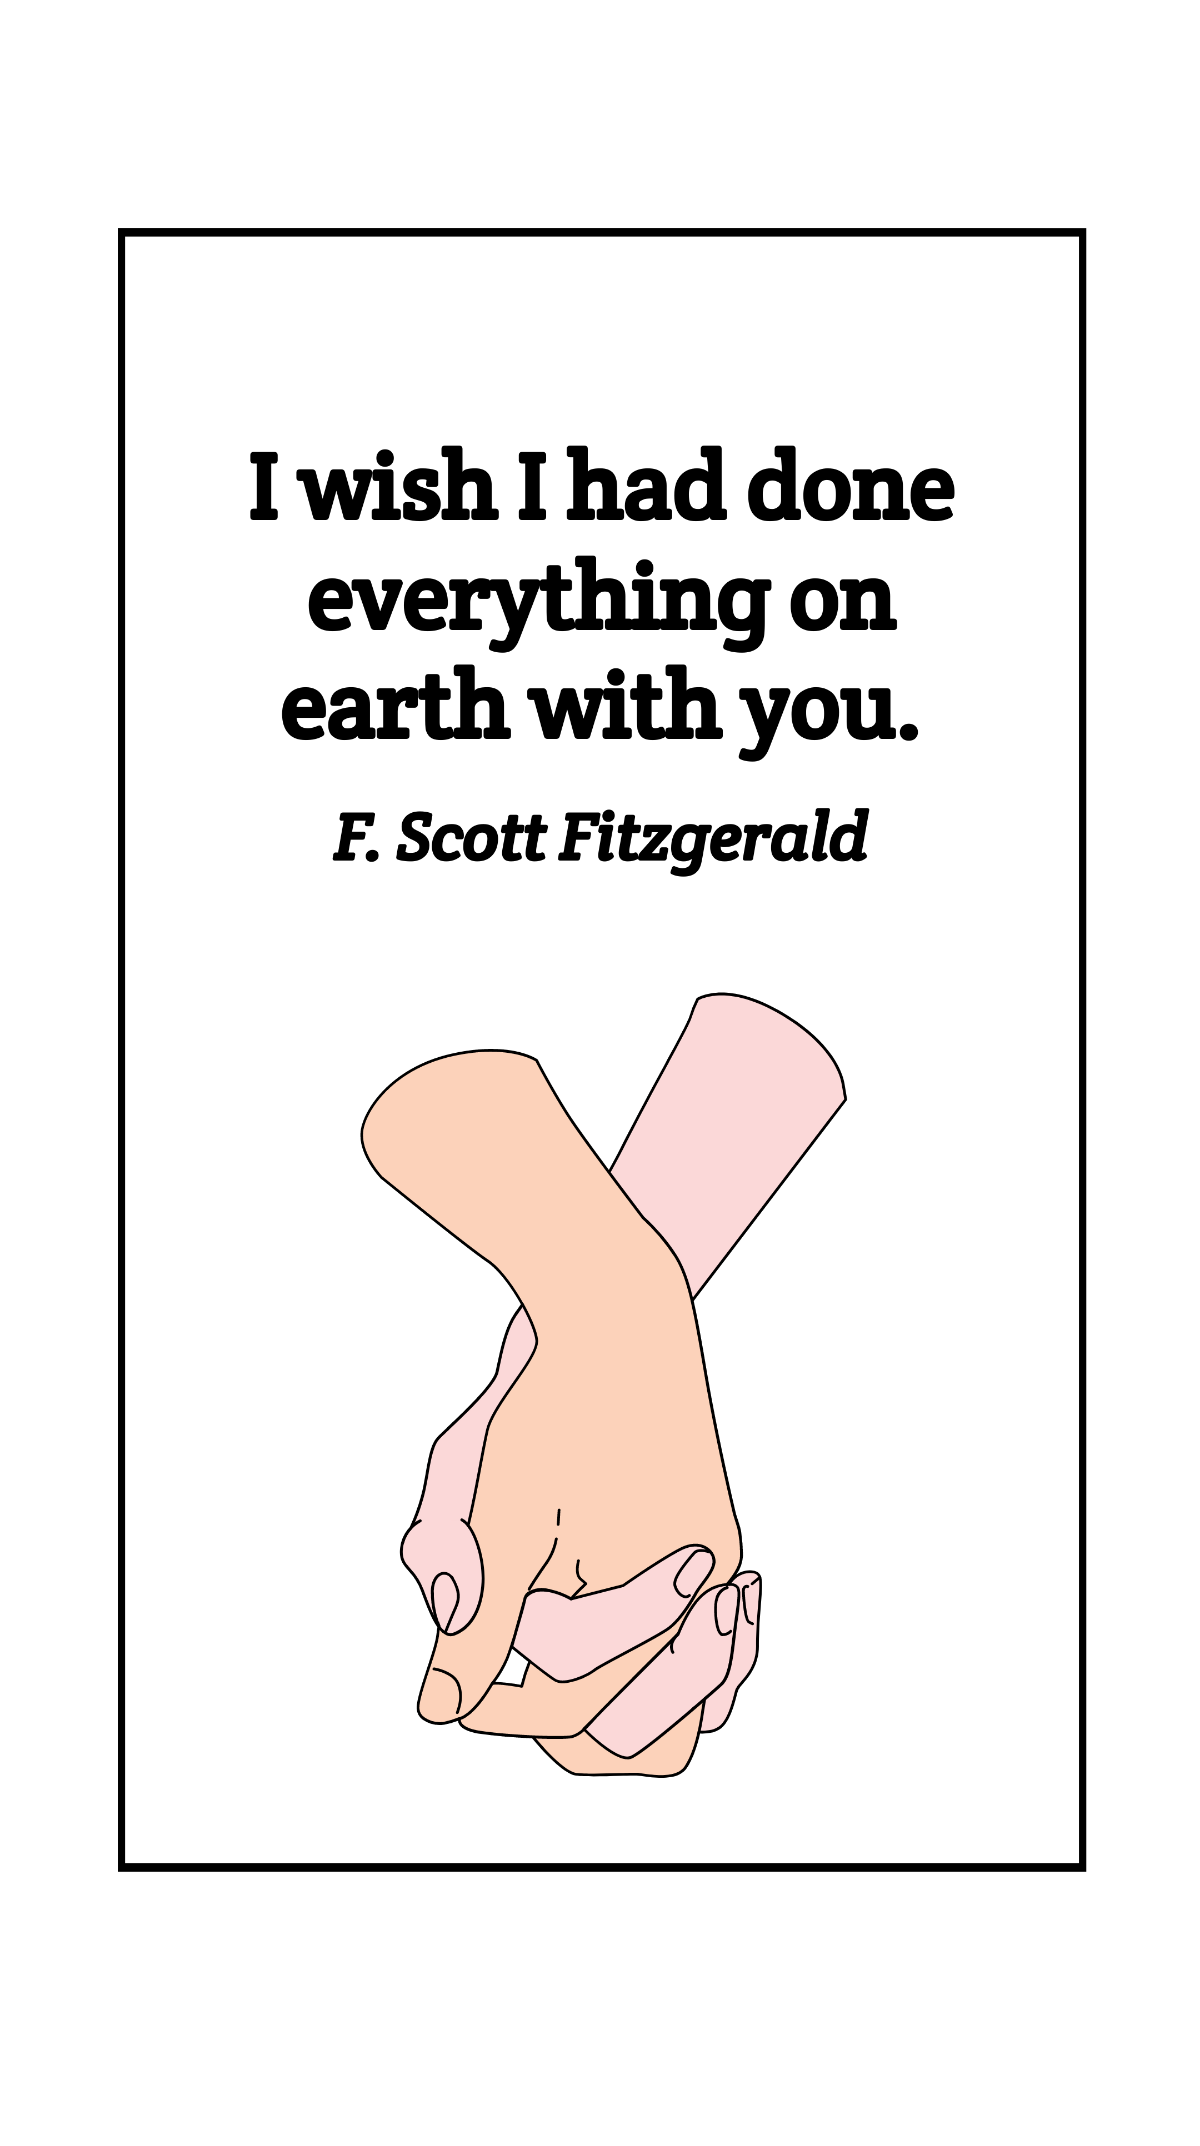 F. Scott Fitzgerald - I wish I had done everything on earth with you.